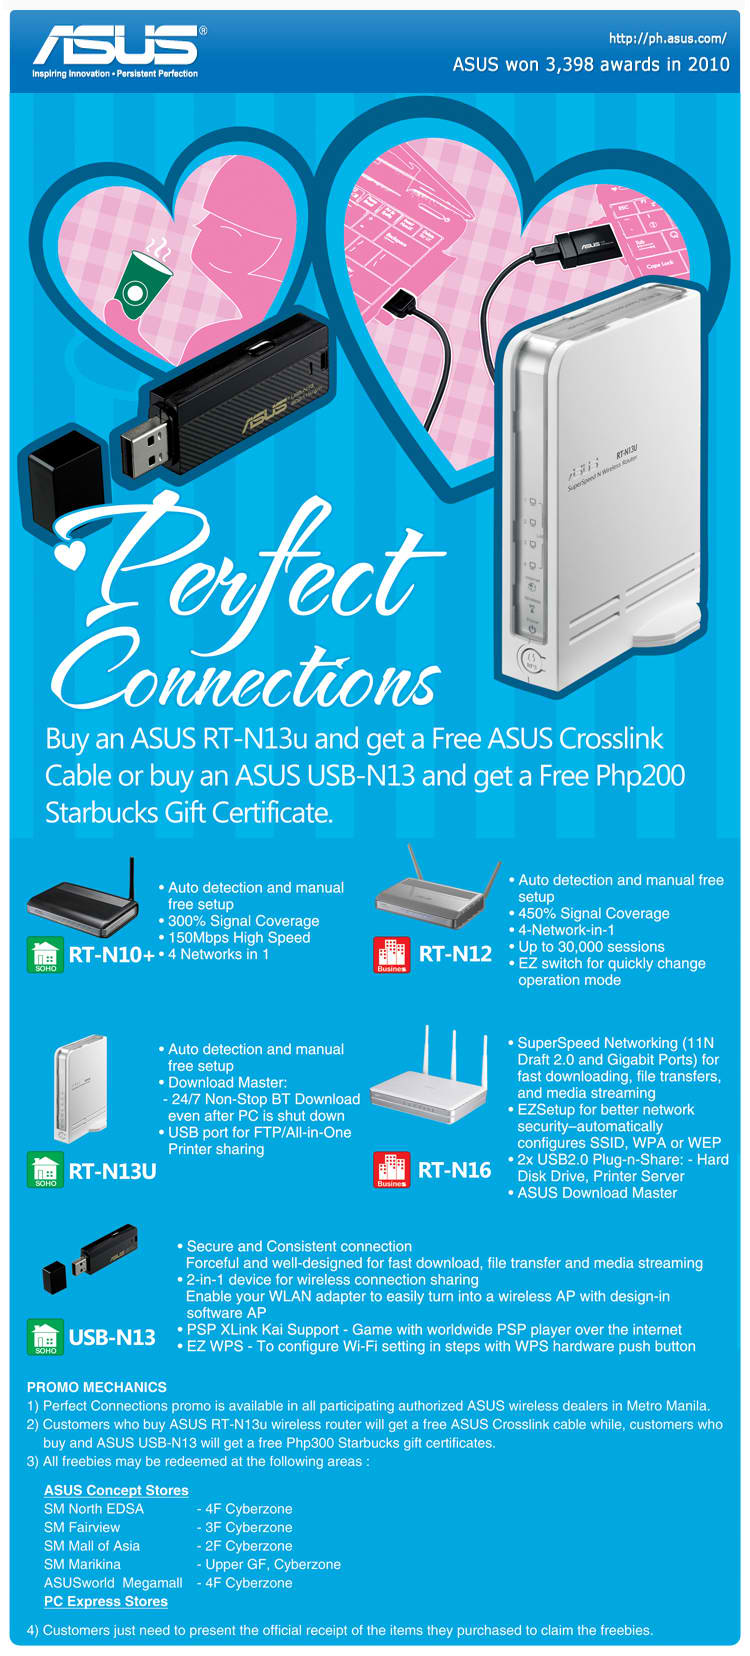 ASUS Perfect Connections